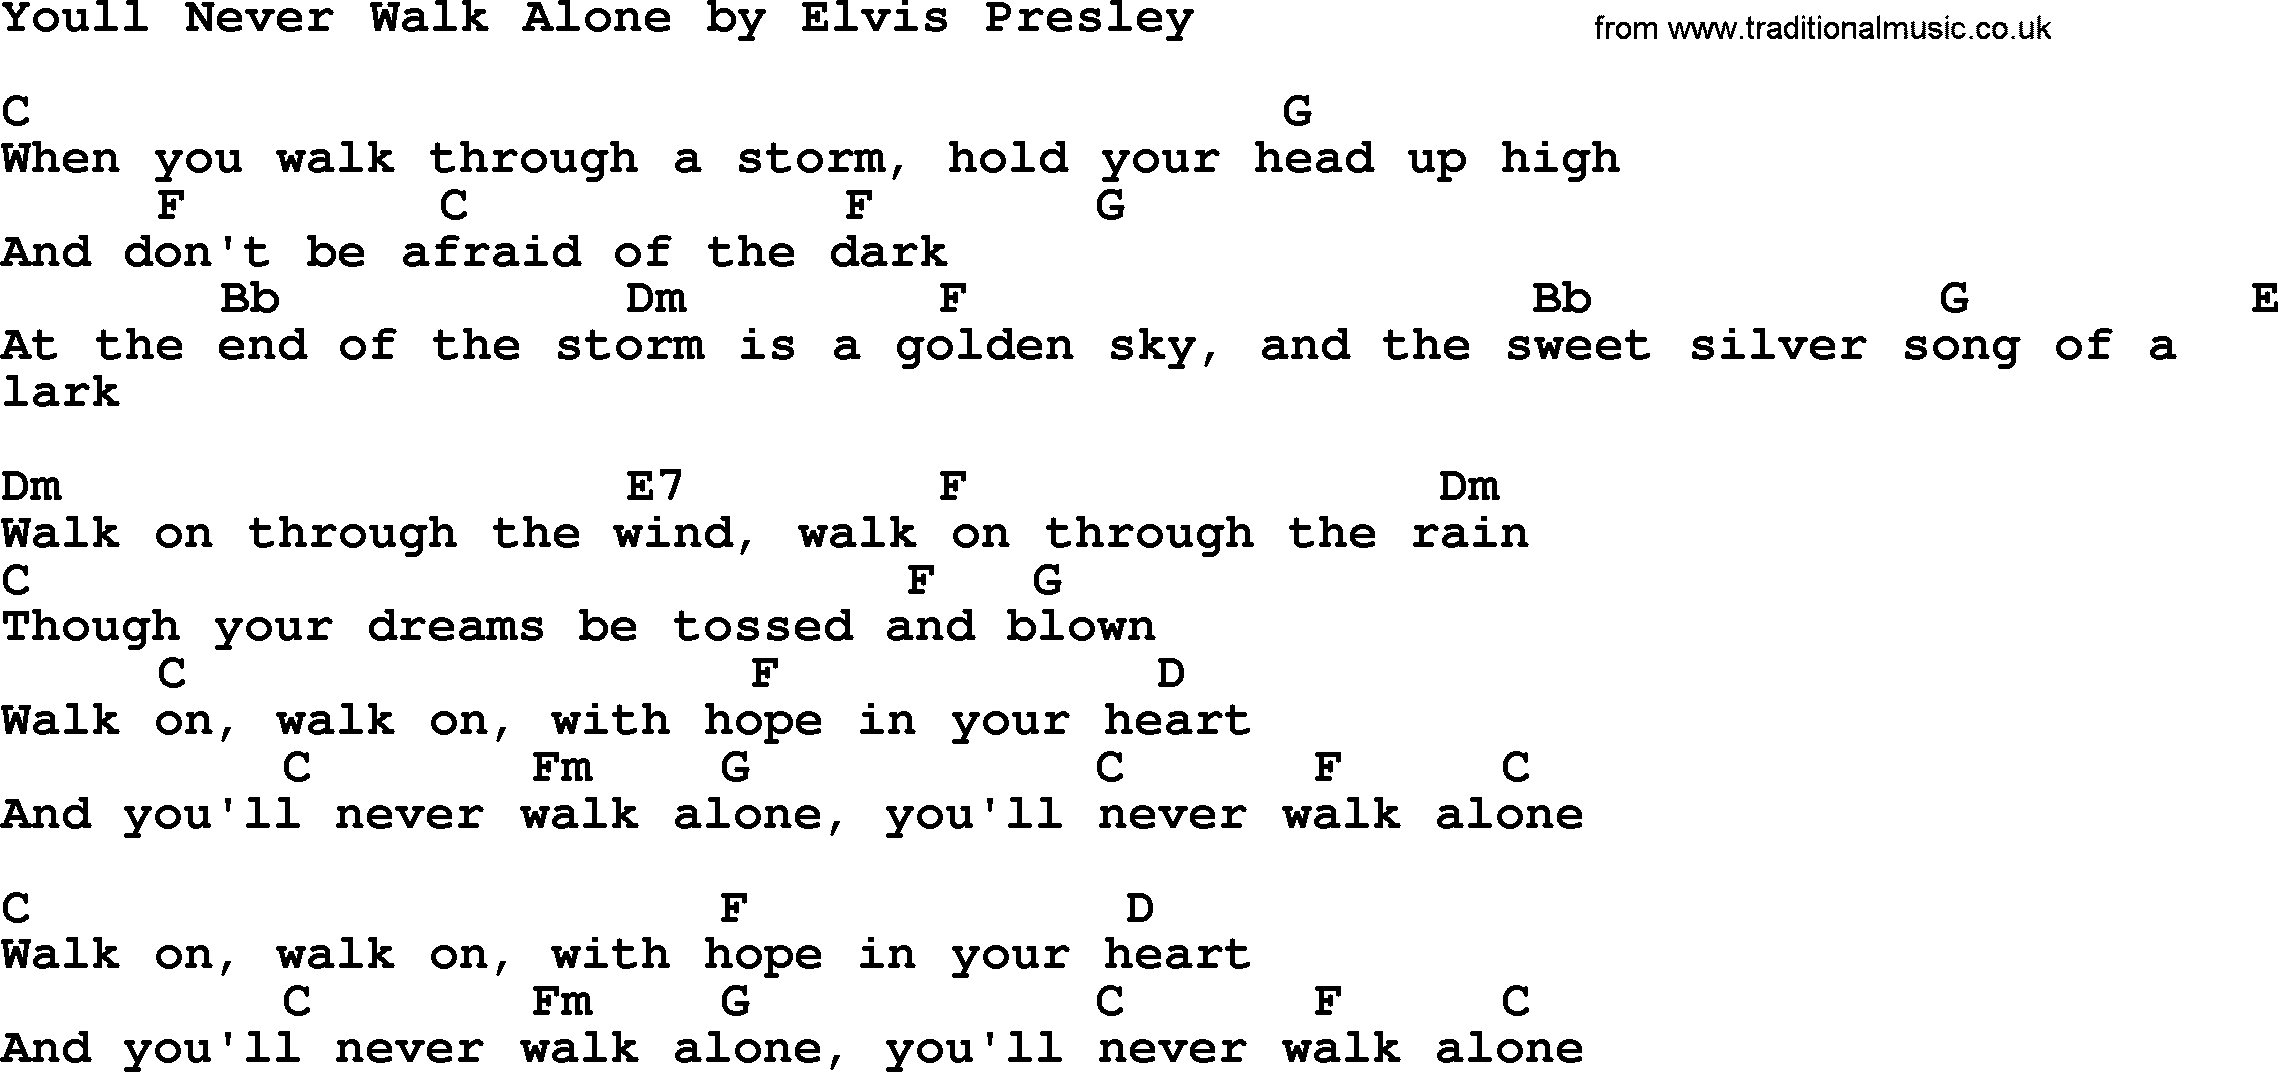 Elvis Presley song: Youll Never Walk Alone, lyrics and chords